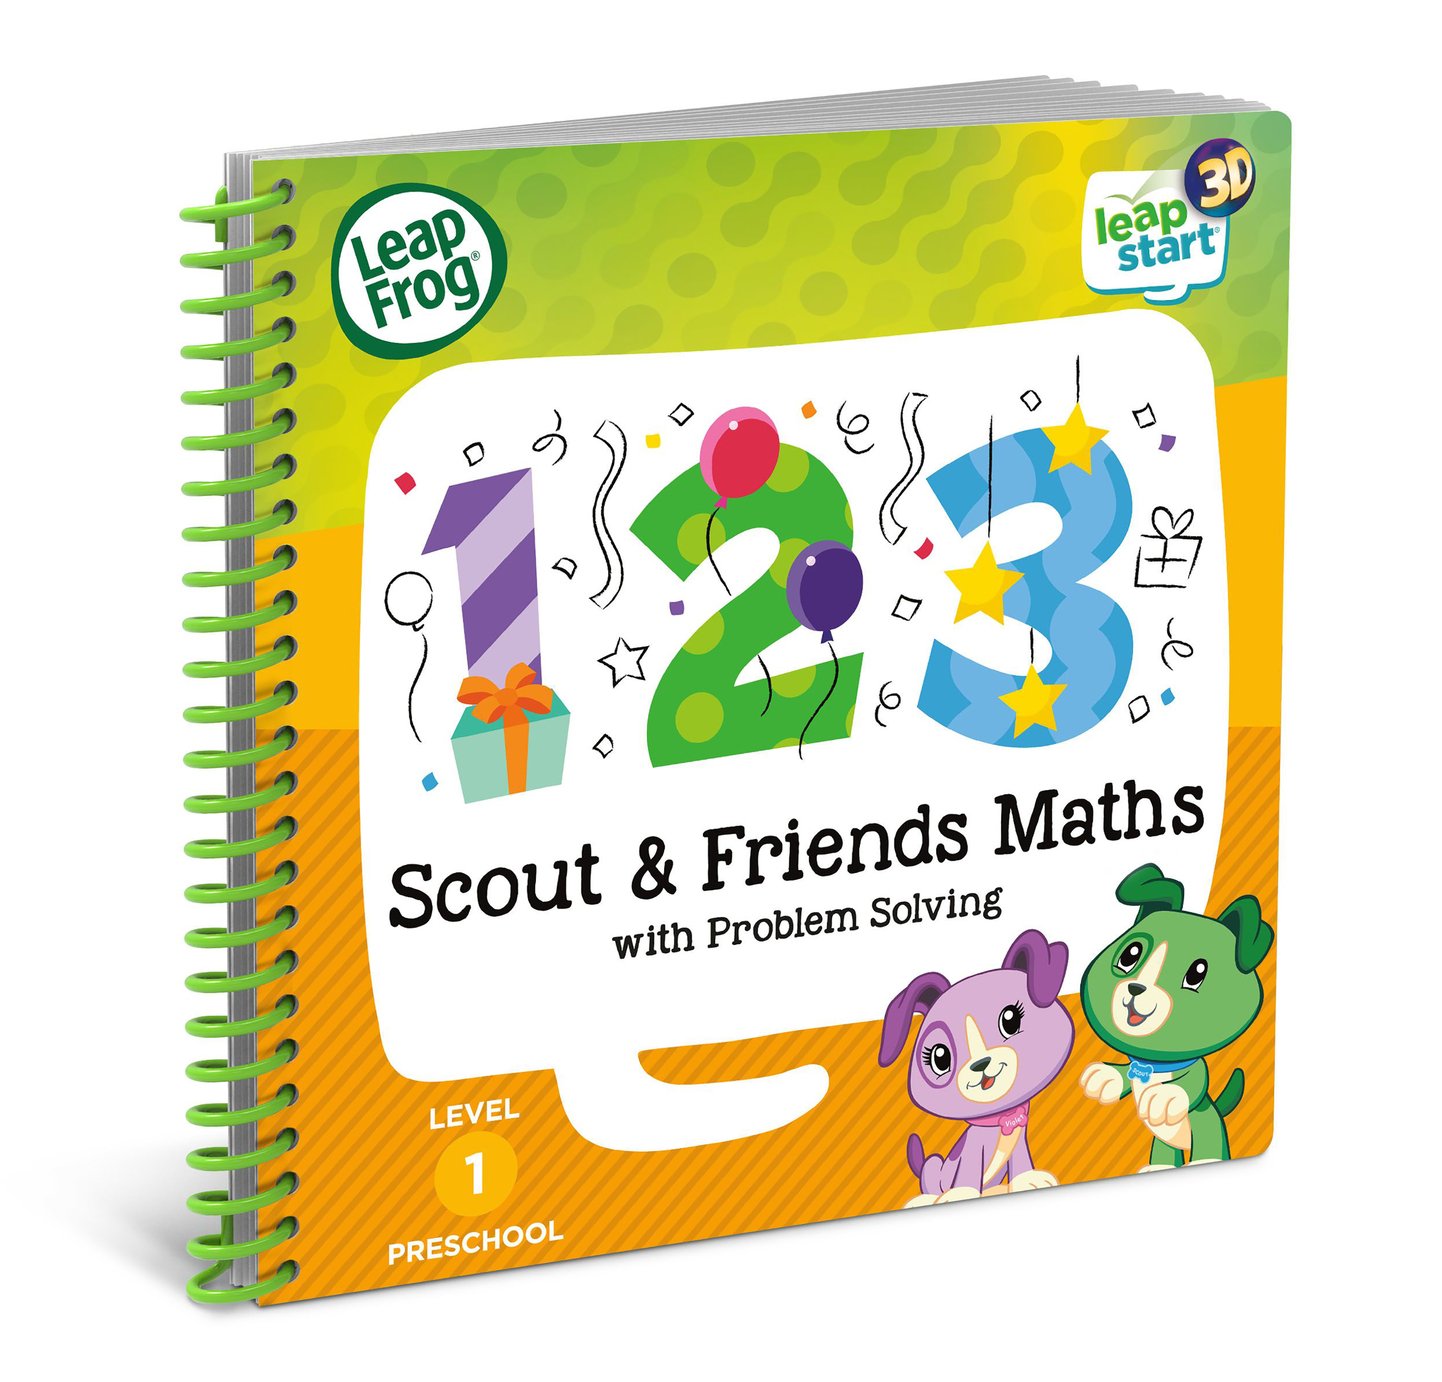 LeapFrog LeapStart 3D Scout Maths Story Book Review